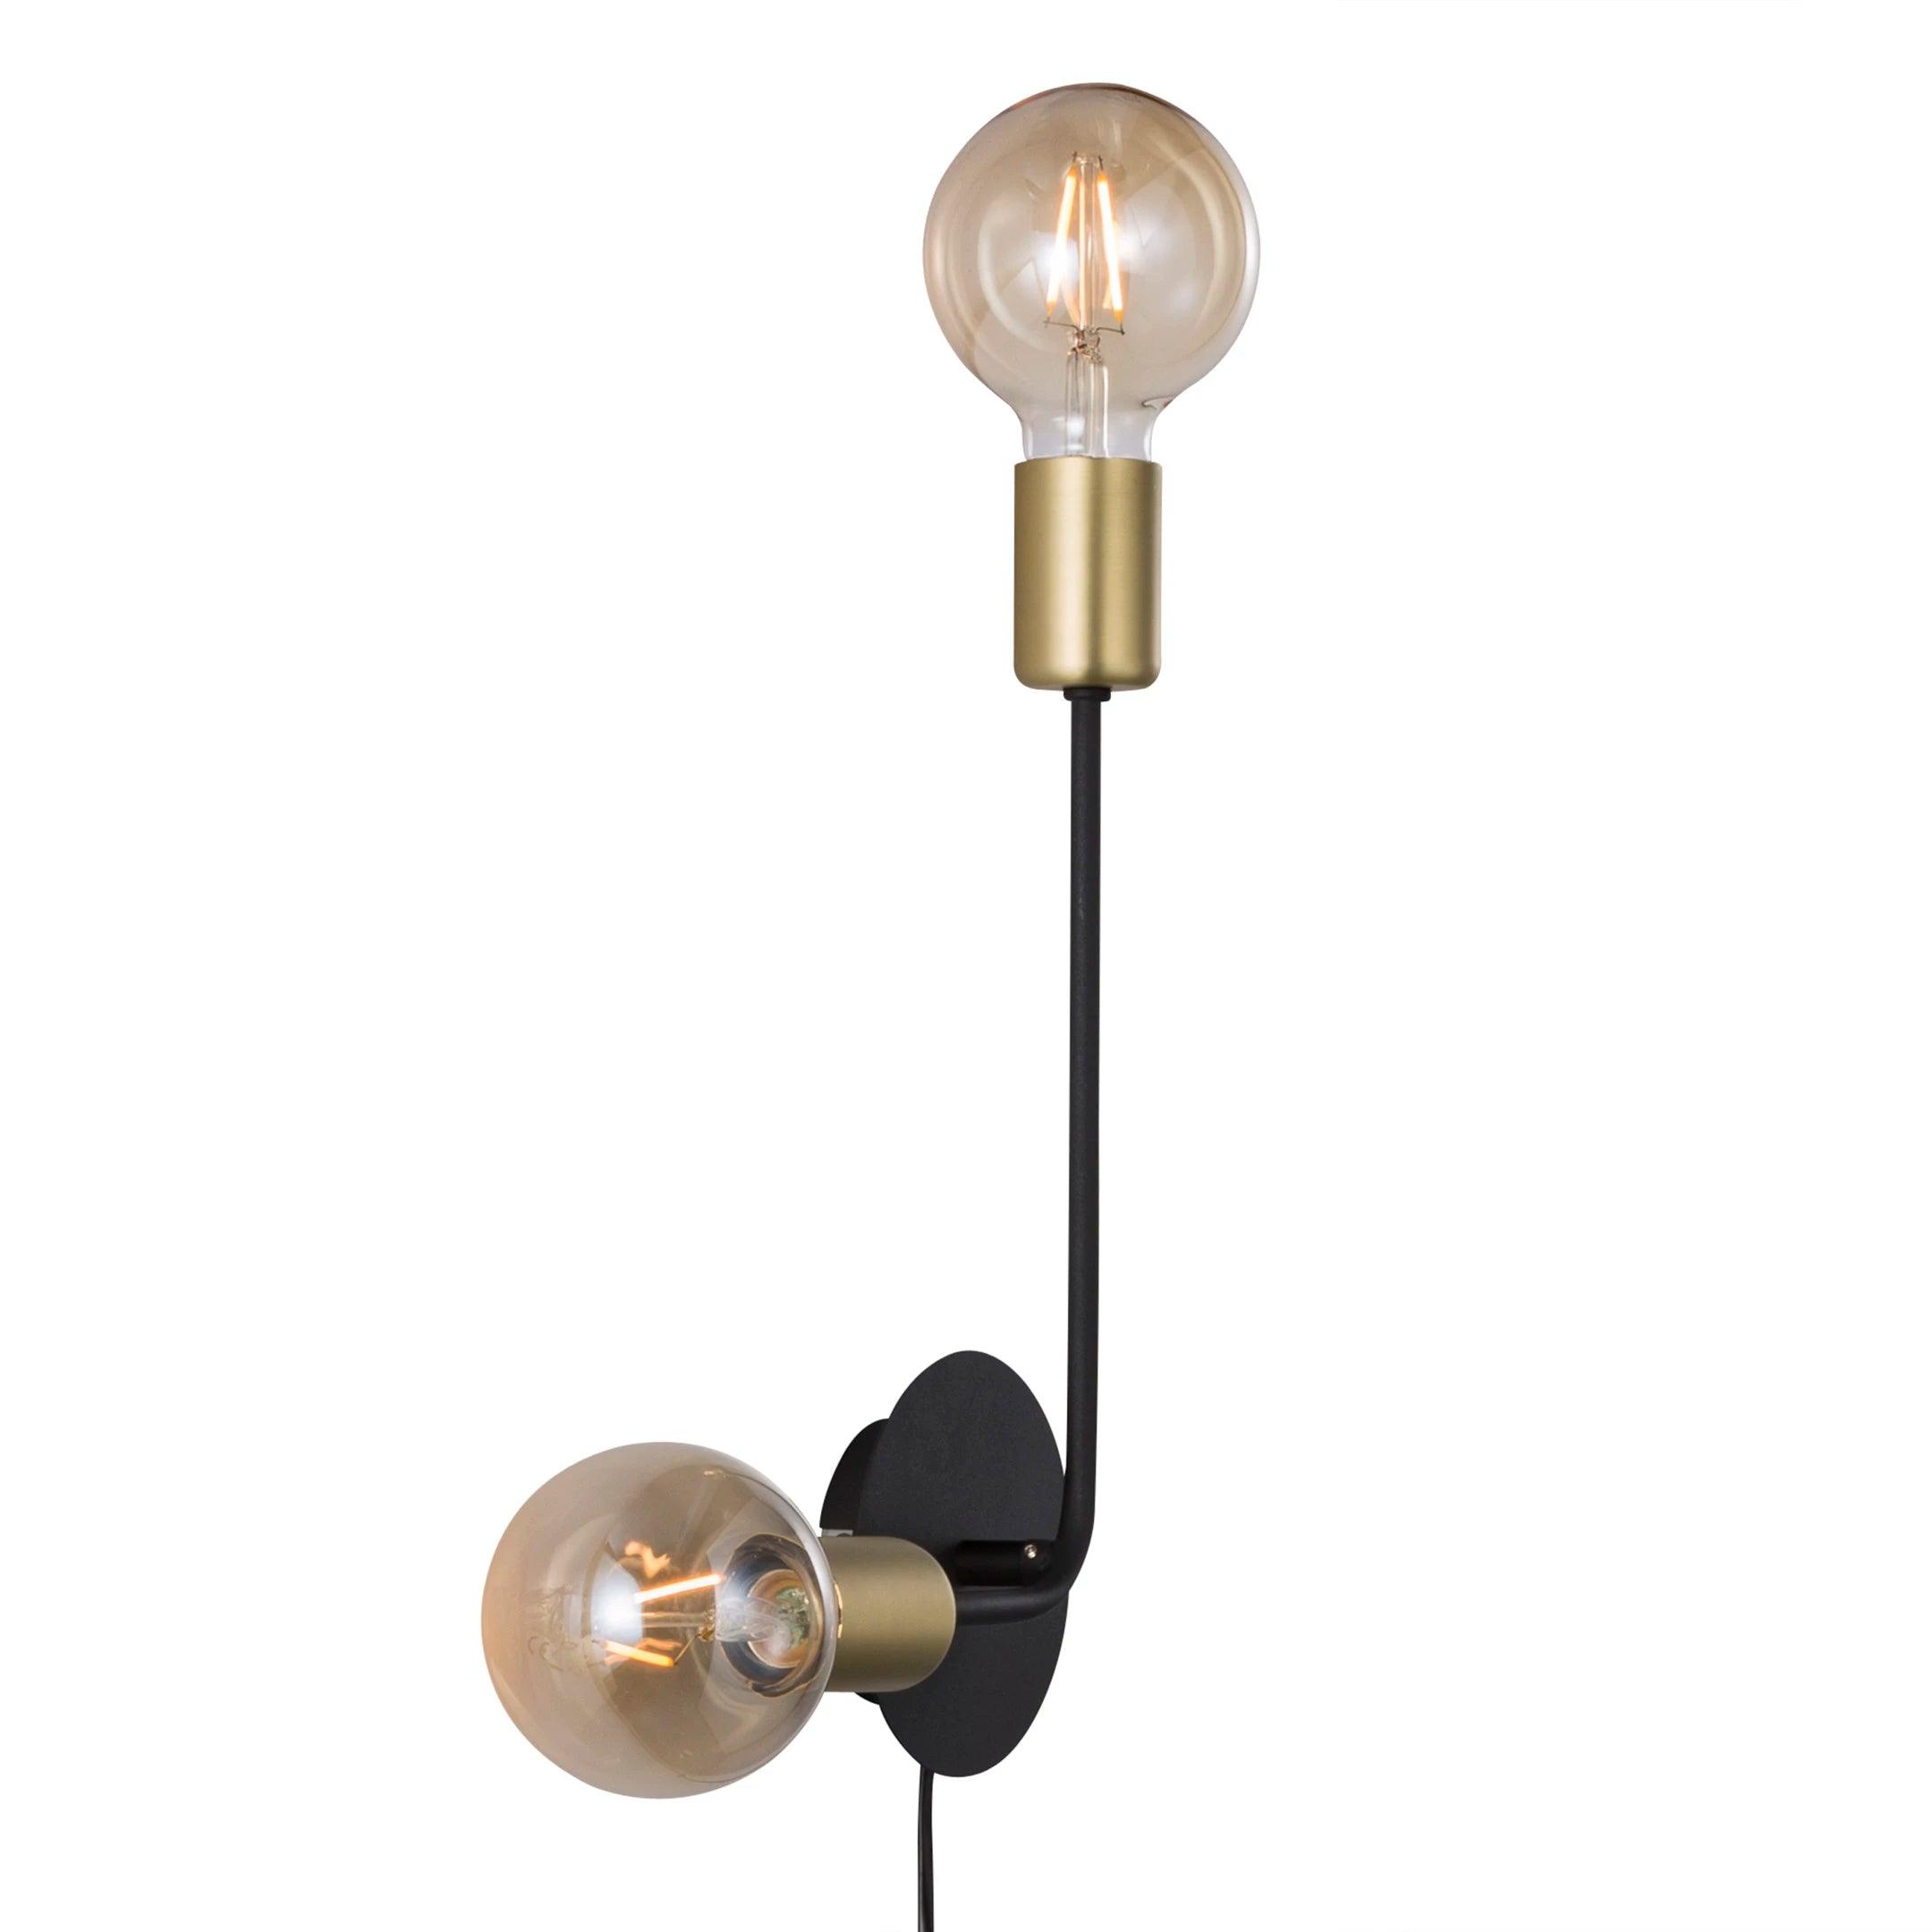 Wall lamp JOSEFINE black with gold details - Eye on Design